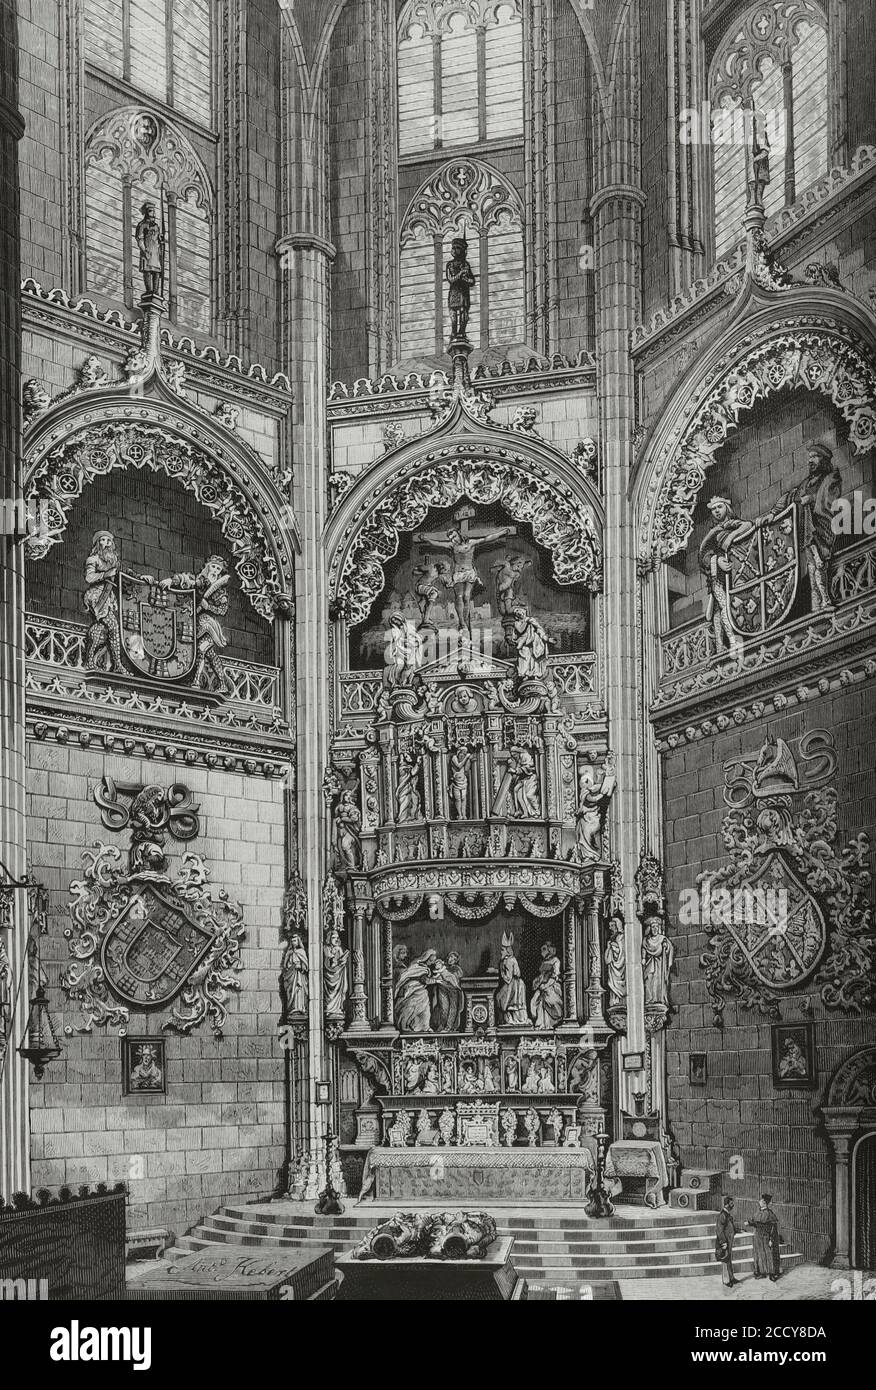 Spain, Burgos. Cathedral. The Constables Chapel. Funeral chapel in Flamboyant Gothic style. Its construction was commissioned by the Constables of Castile Don Pedro Fernández de Velasco and his wife Doña Mencia de Mendoza, between 1482-1494. Illustration by Martinez Hebert. Engraving by Ovejero. La Ilustracion Española y Americana, 1881. Stock Photo